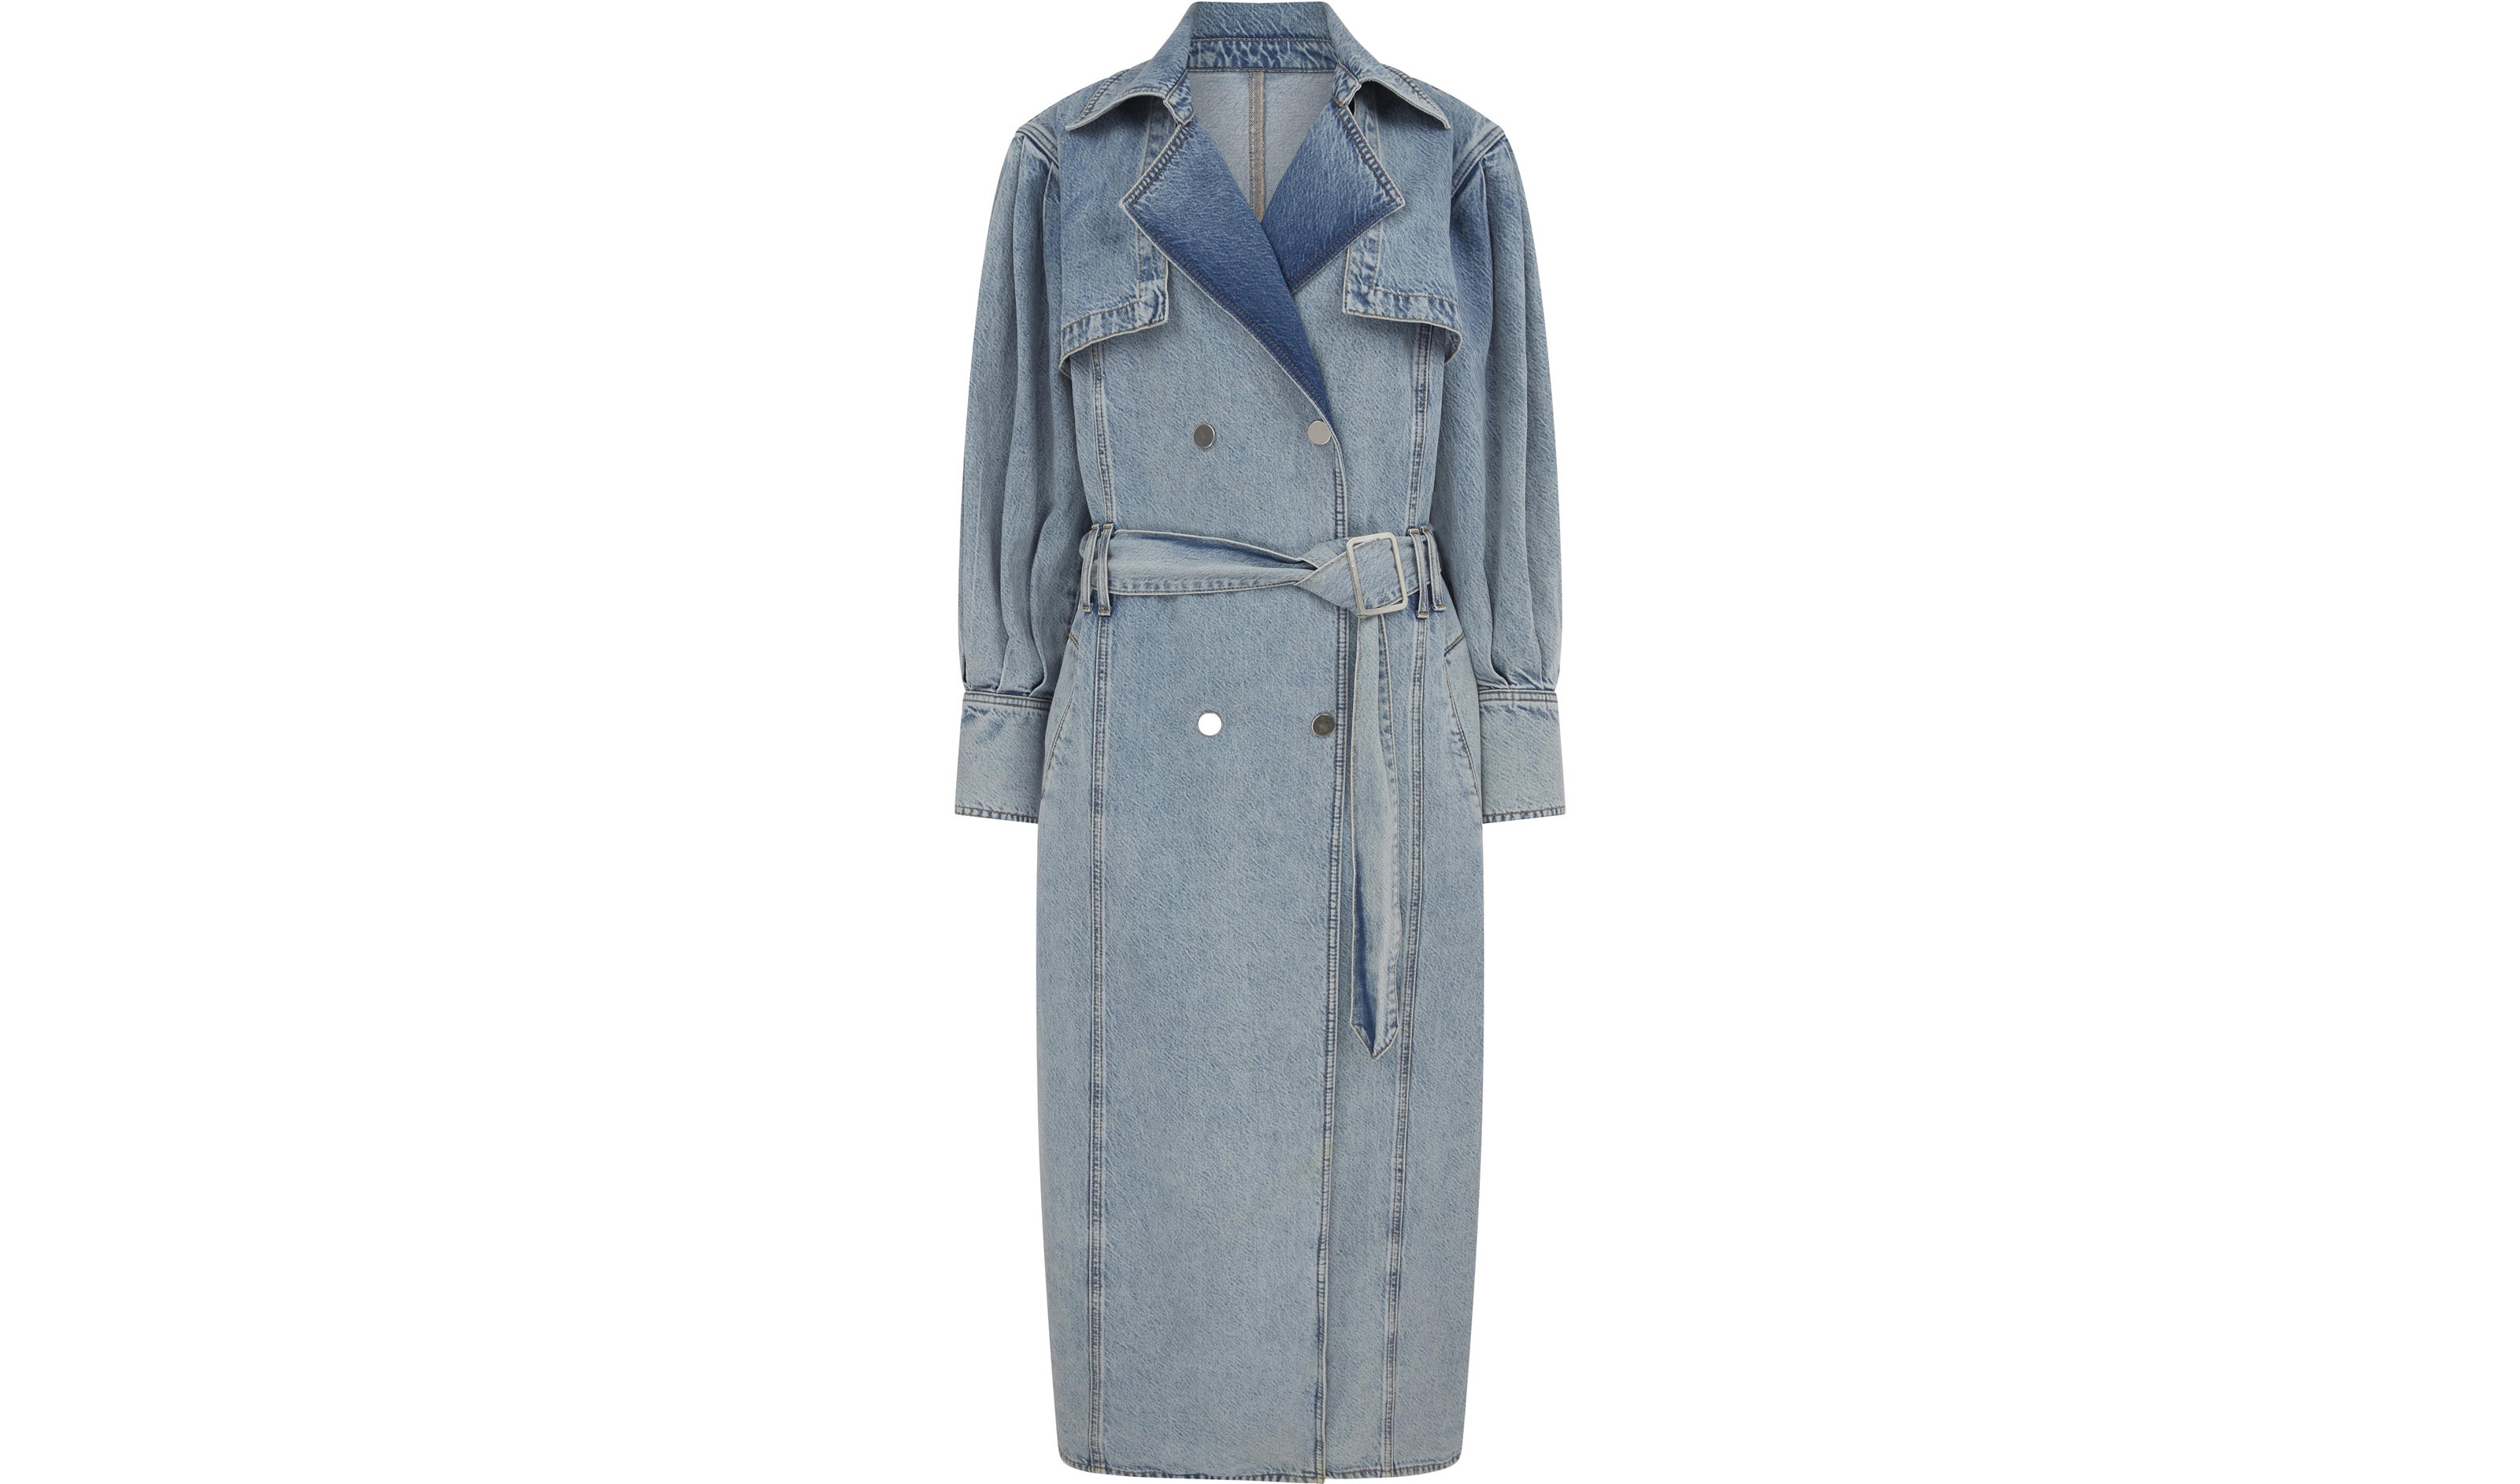 River Island Long Sleeve Denim Trench Jacket in Blue, £72 (was £90)